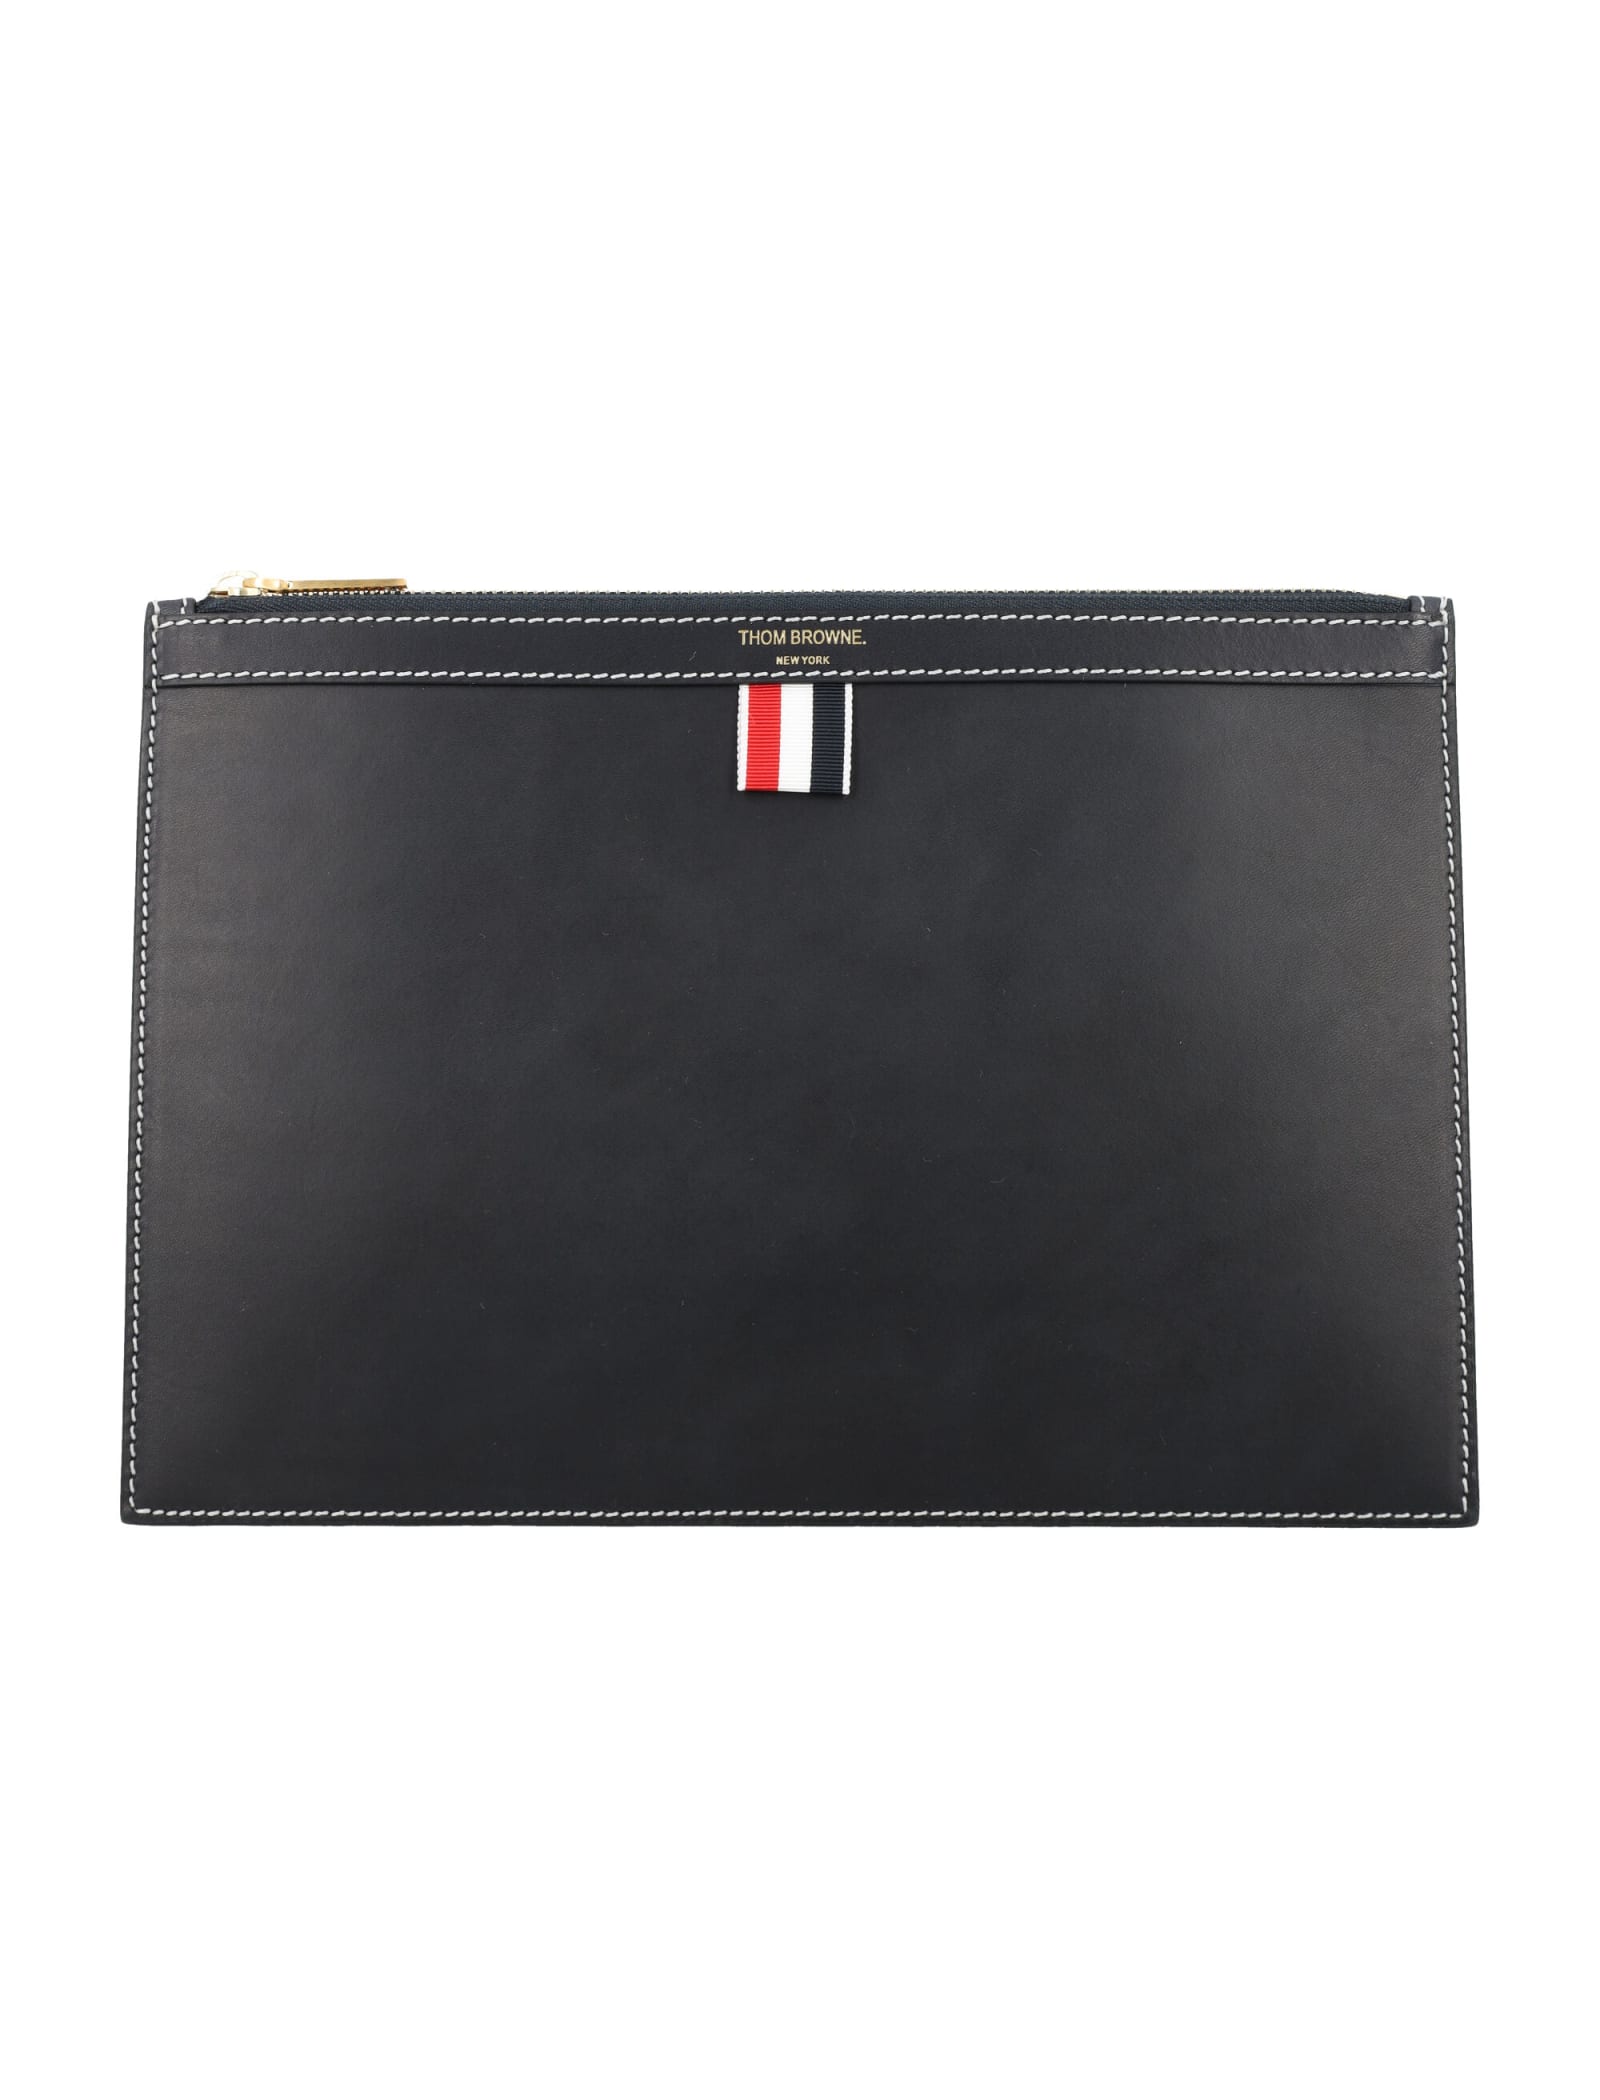 Thom Browne Document Holder Small In Navy